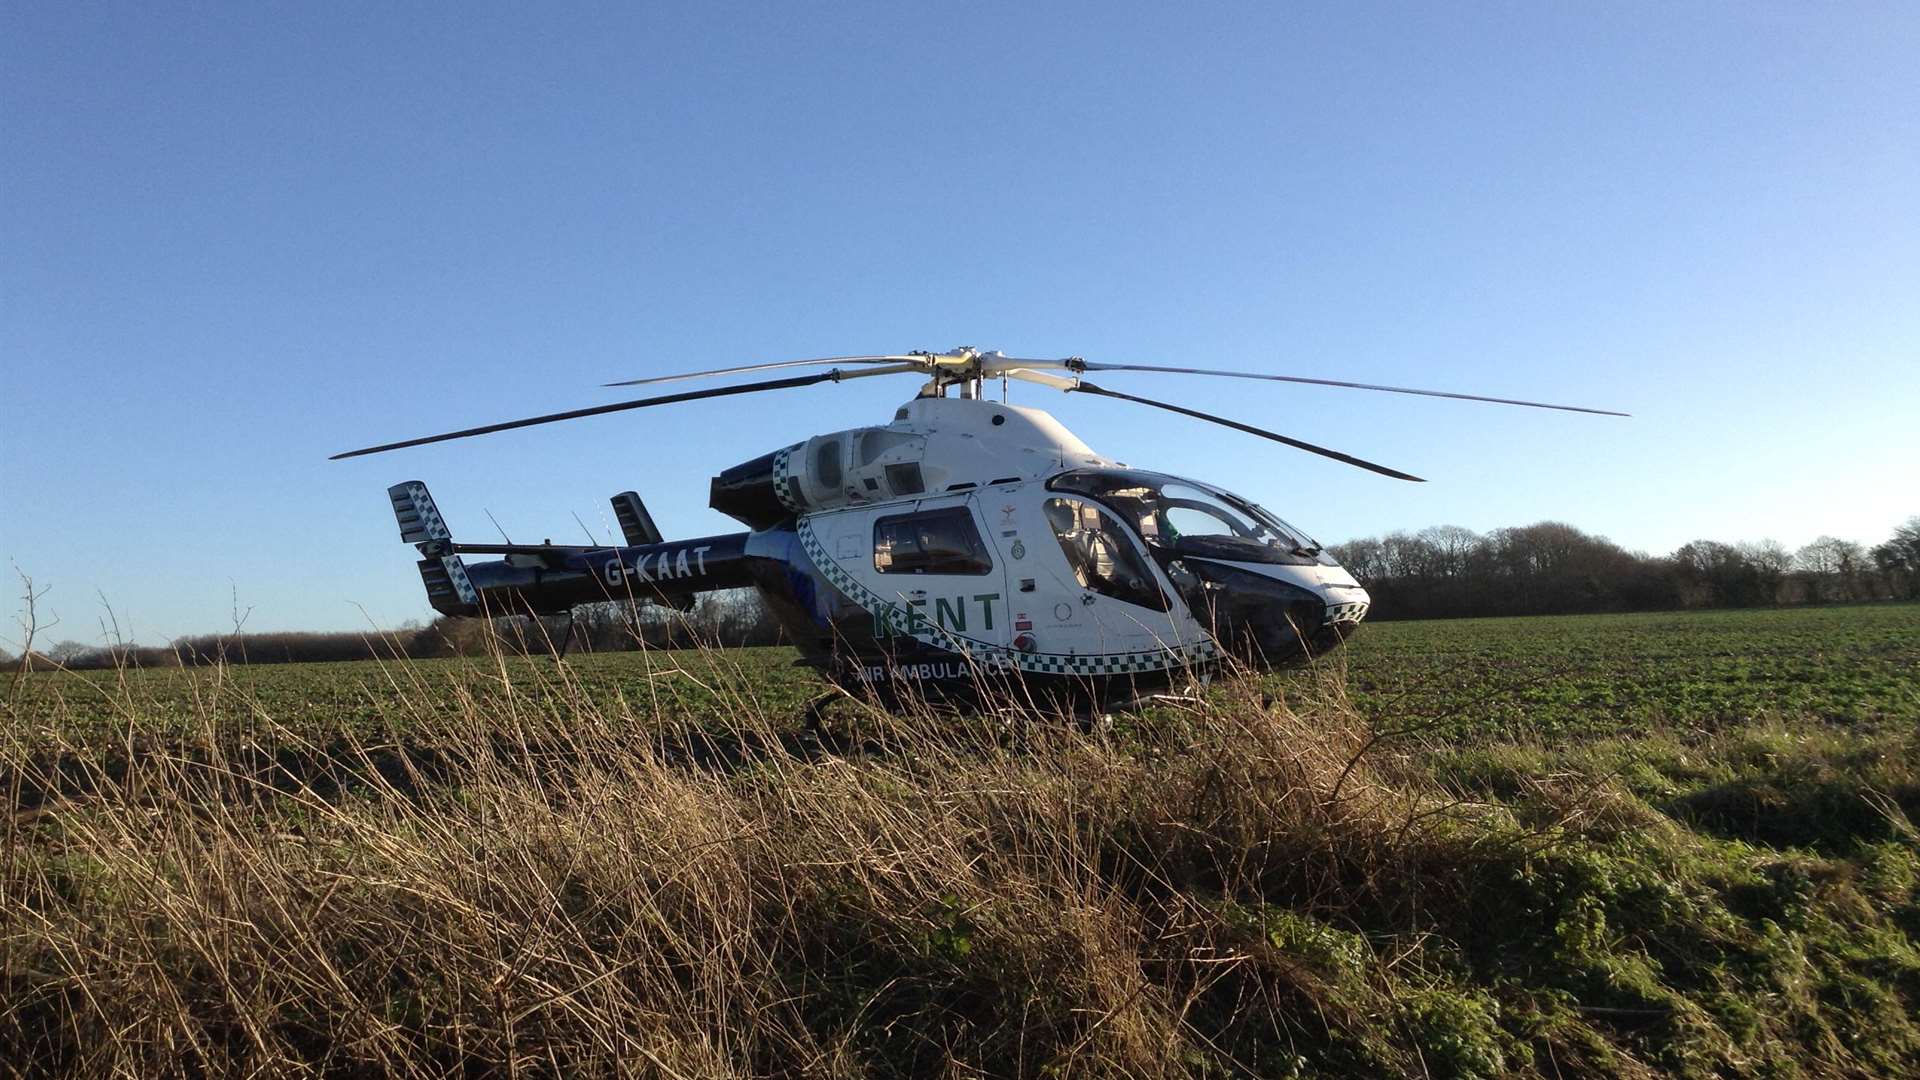 A driver was taken to hospital after the crash, which involved the air ambulance